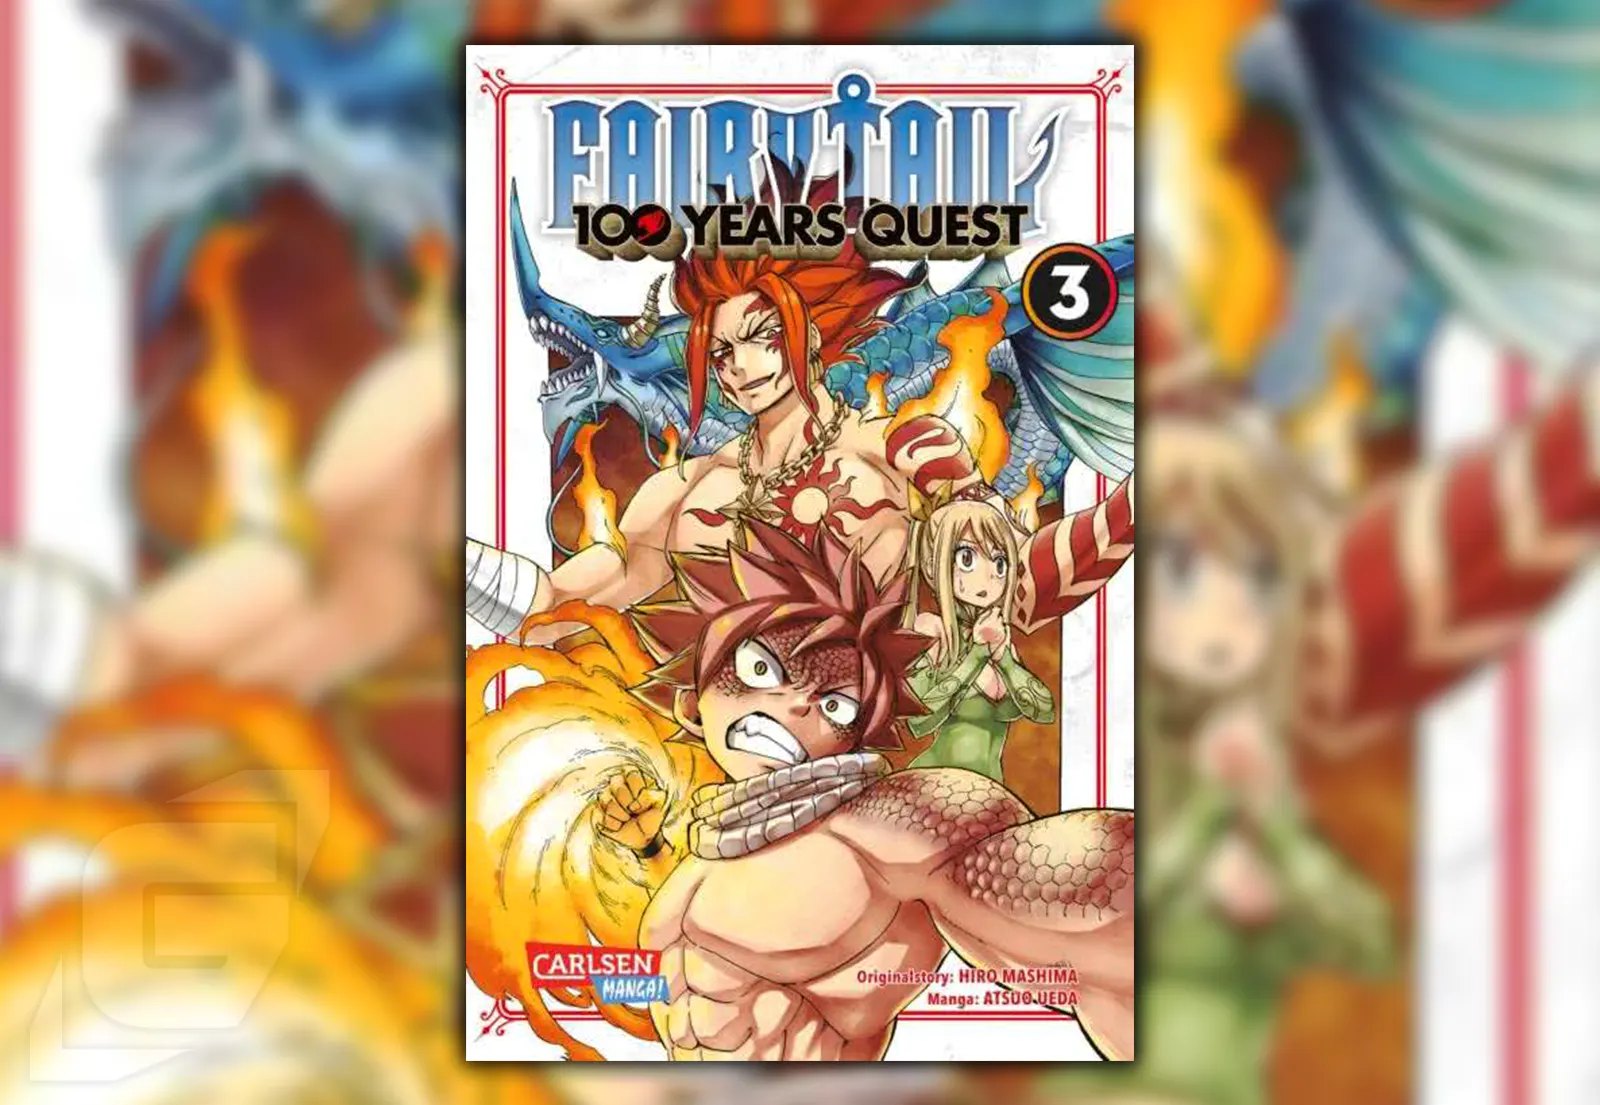 Review zu Fairy Tail – 100 Years Quest Band 3